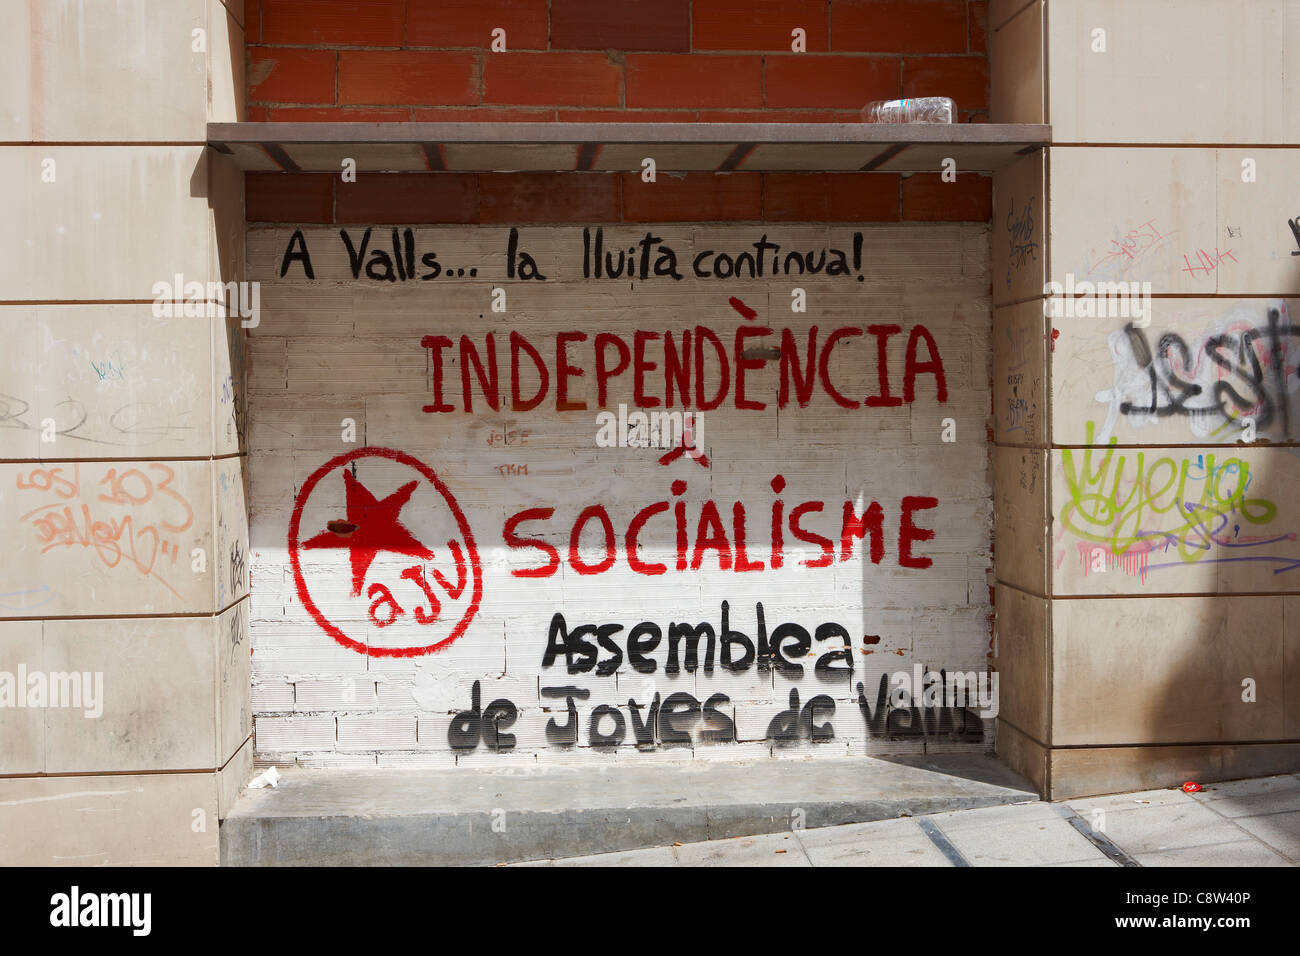 Catalonian separatist movement graffiti: The fight continues! Independence and Socialism. Valls, Catalonia, Spain. Stock Photo